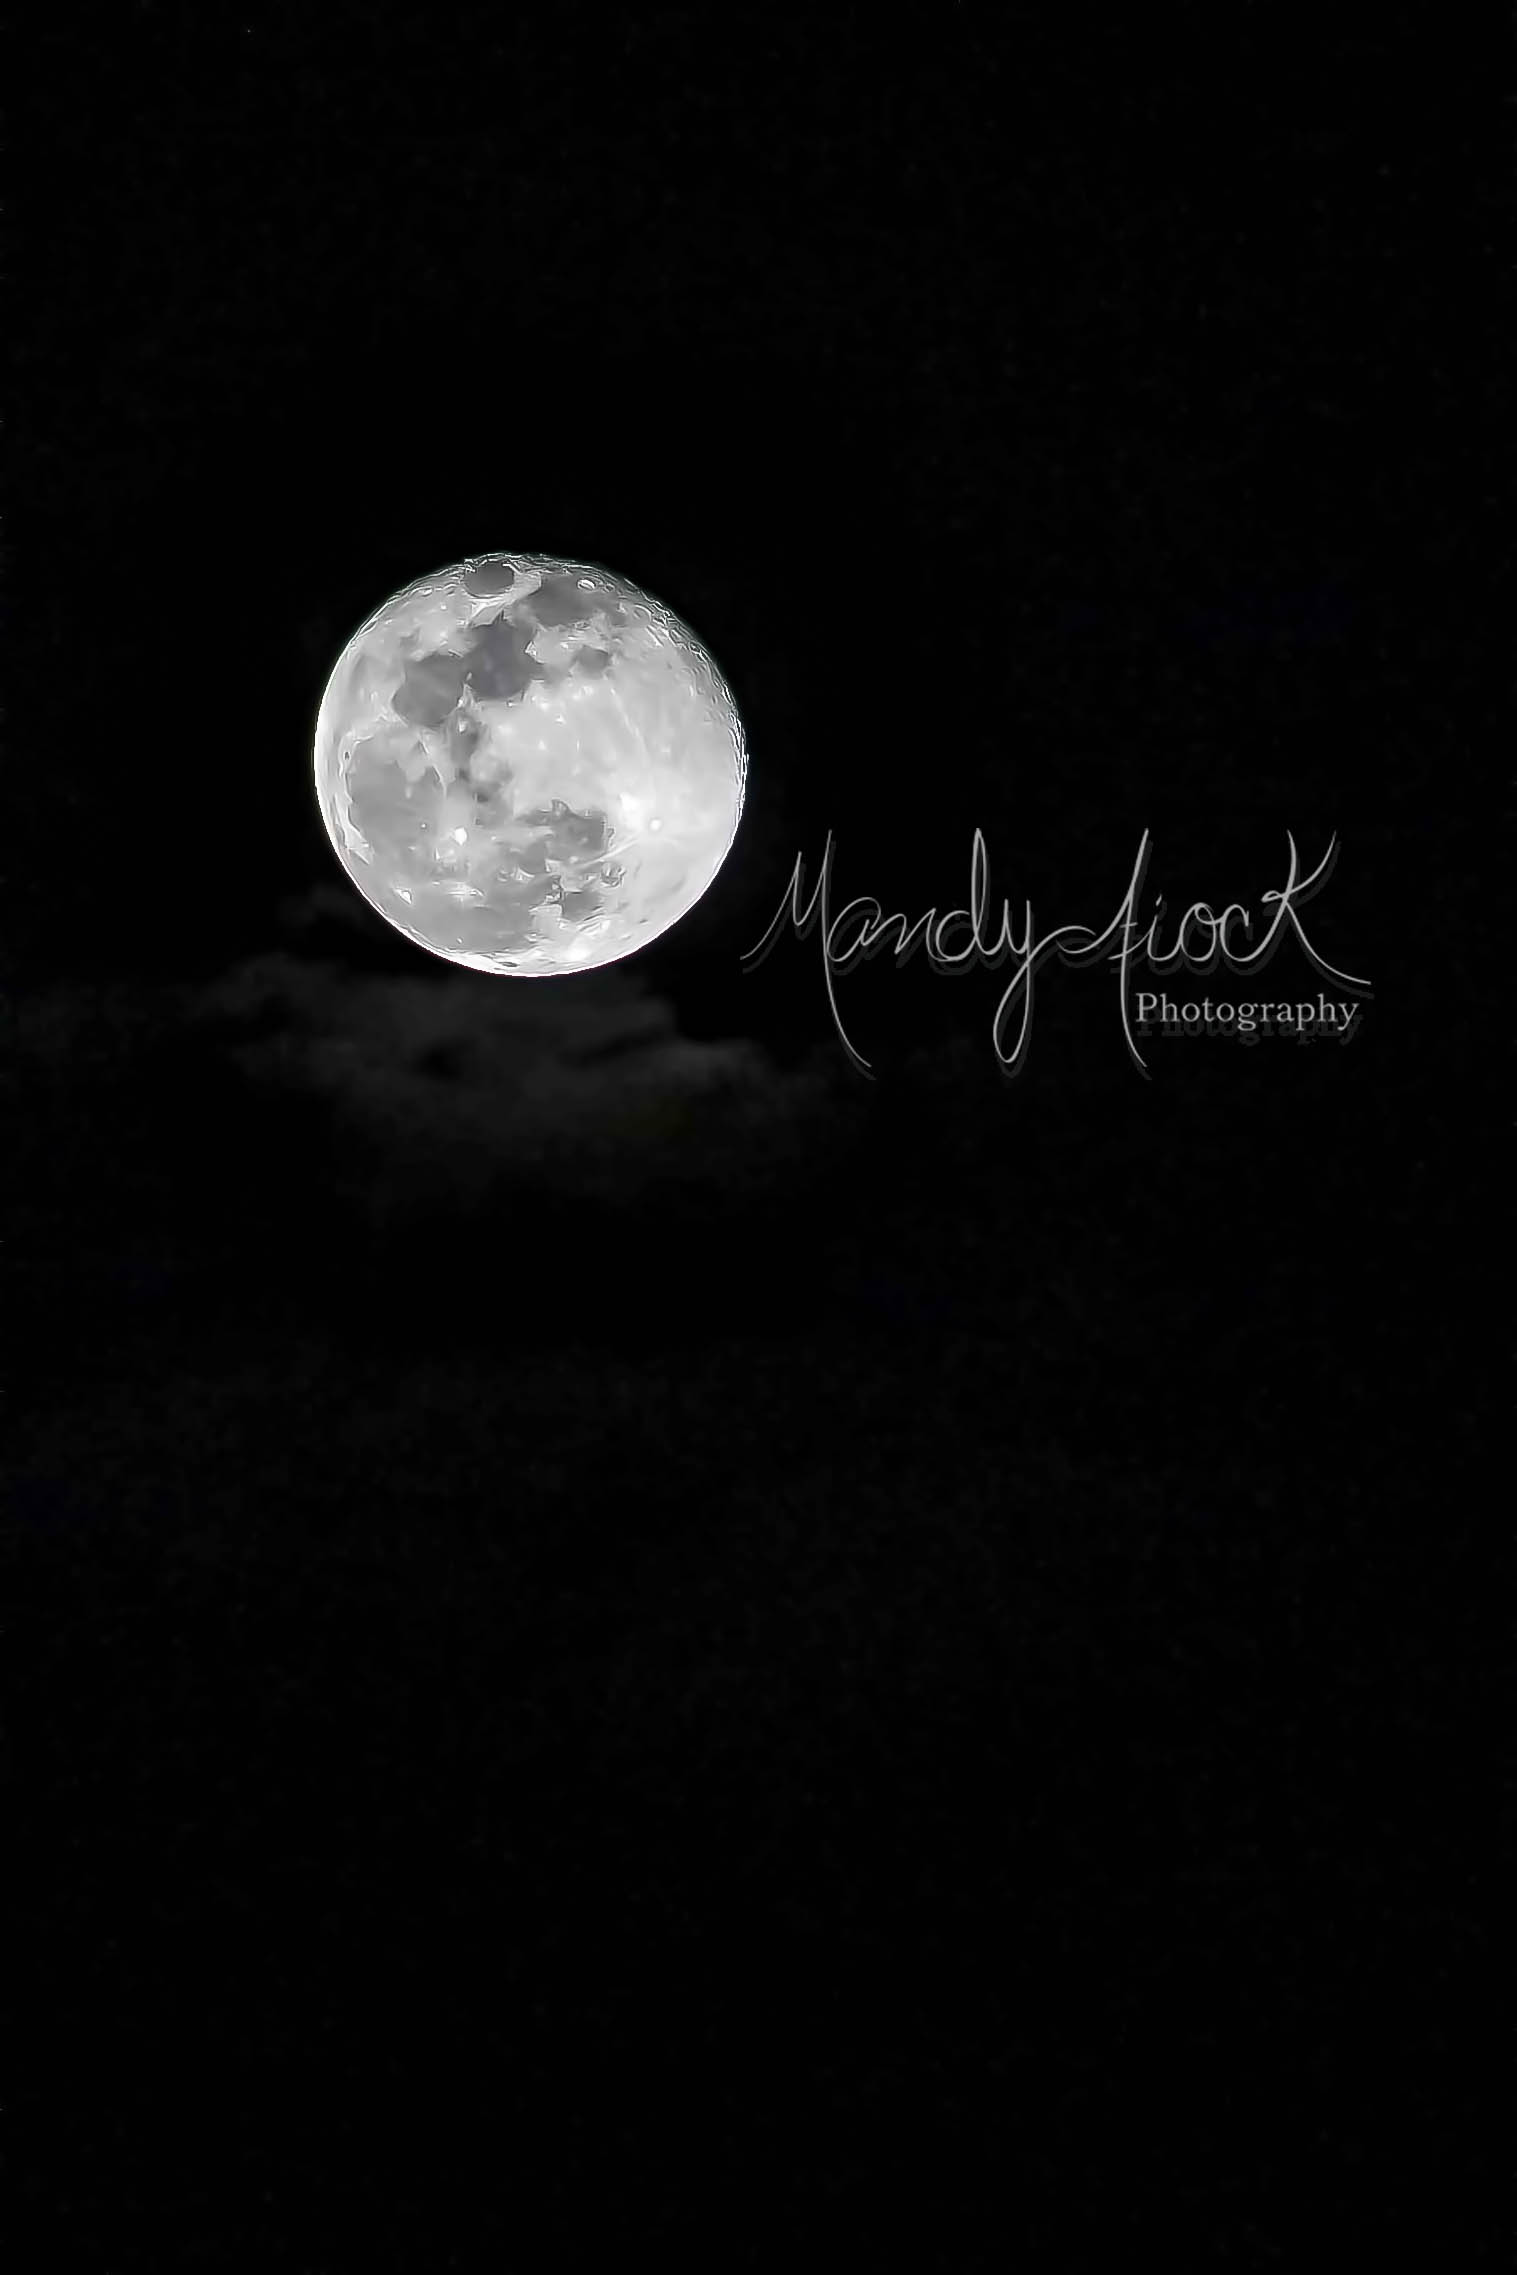 Photo of the Super Snow Moon by Mandy Fiock Photography!